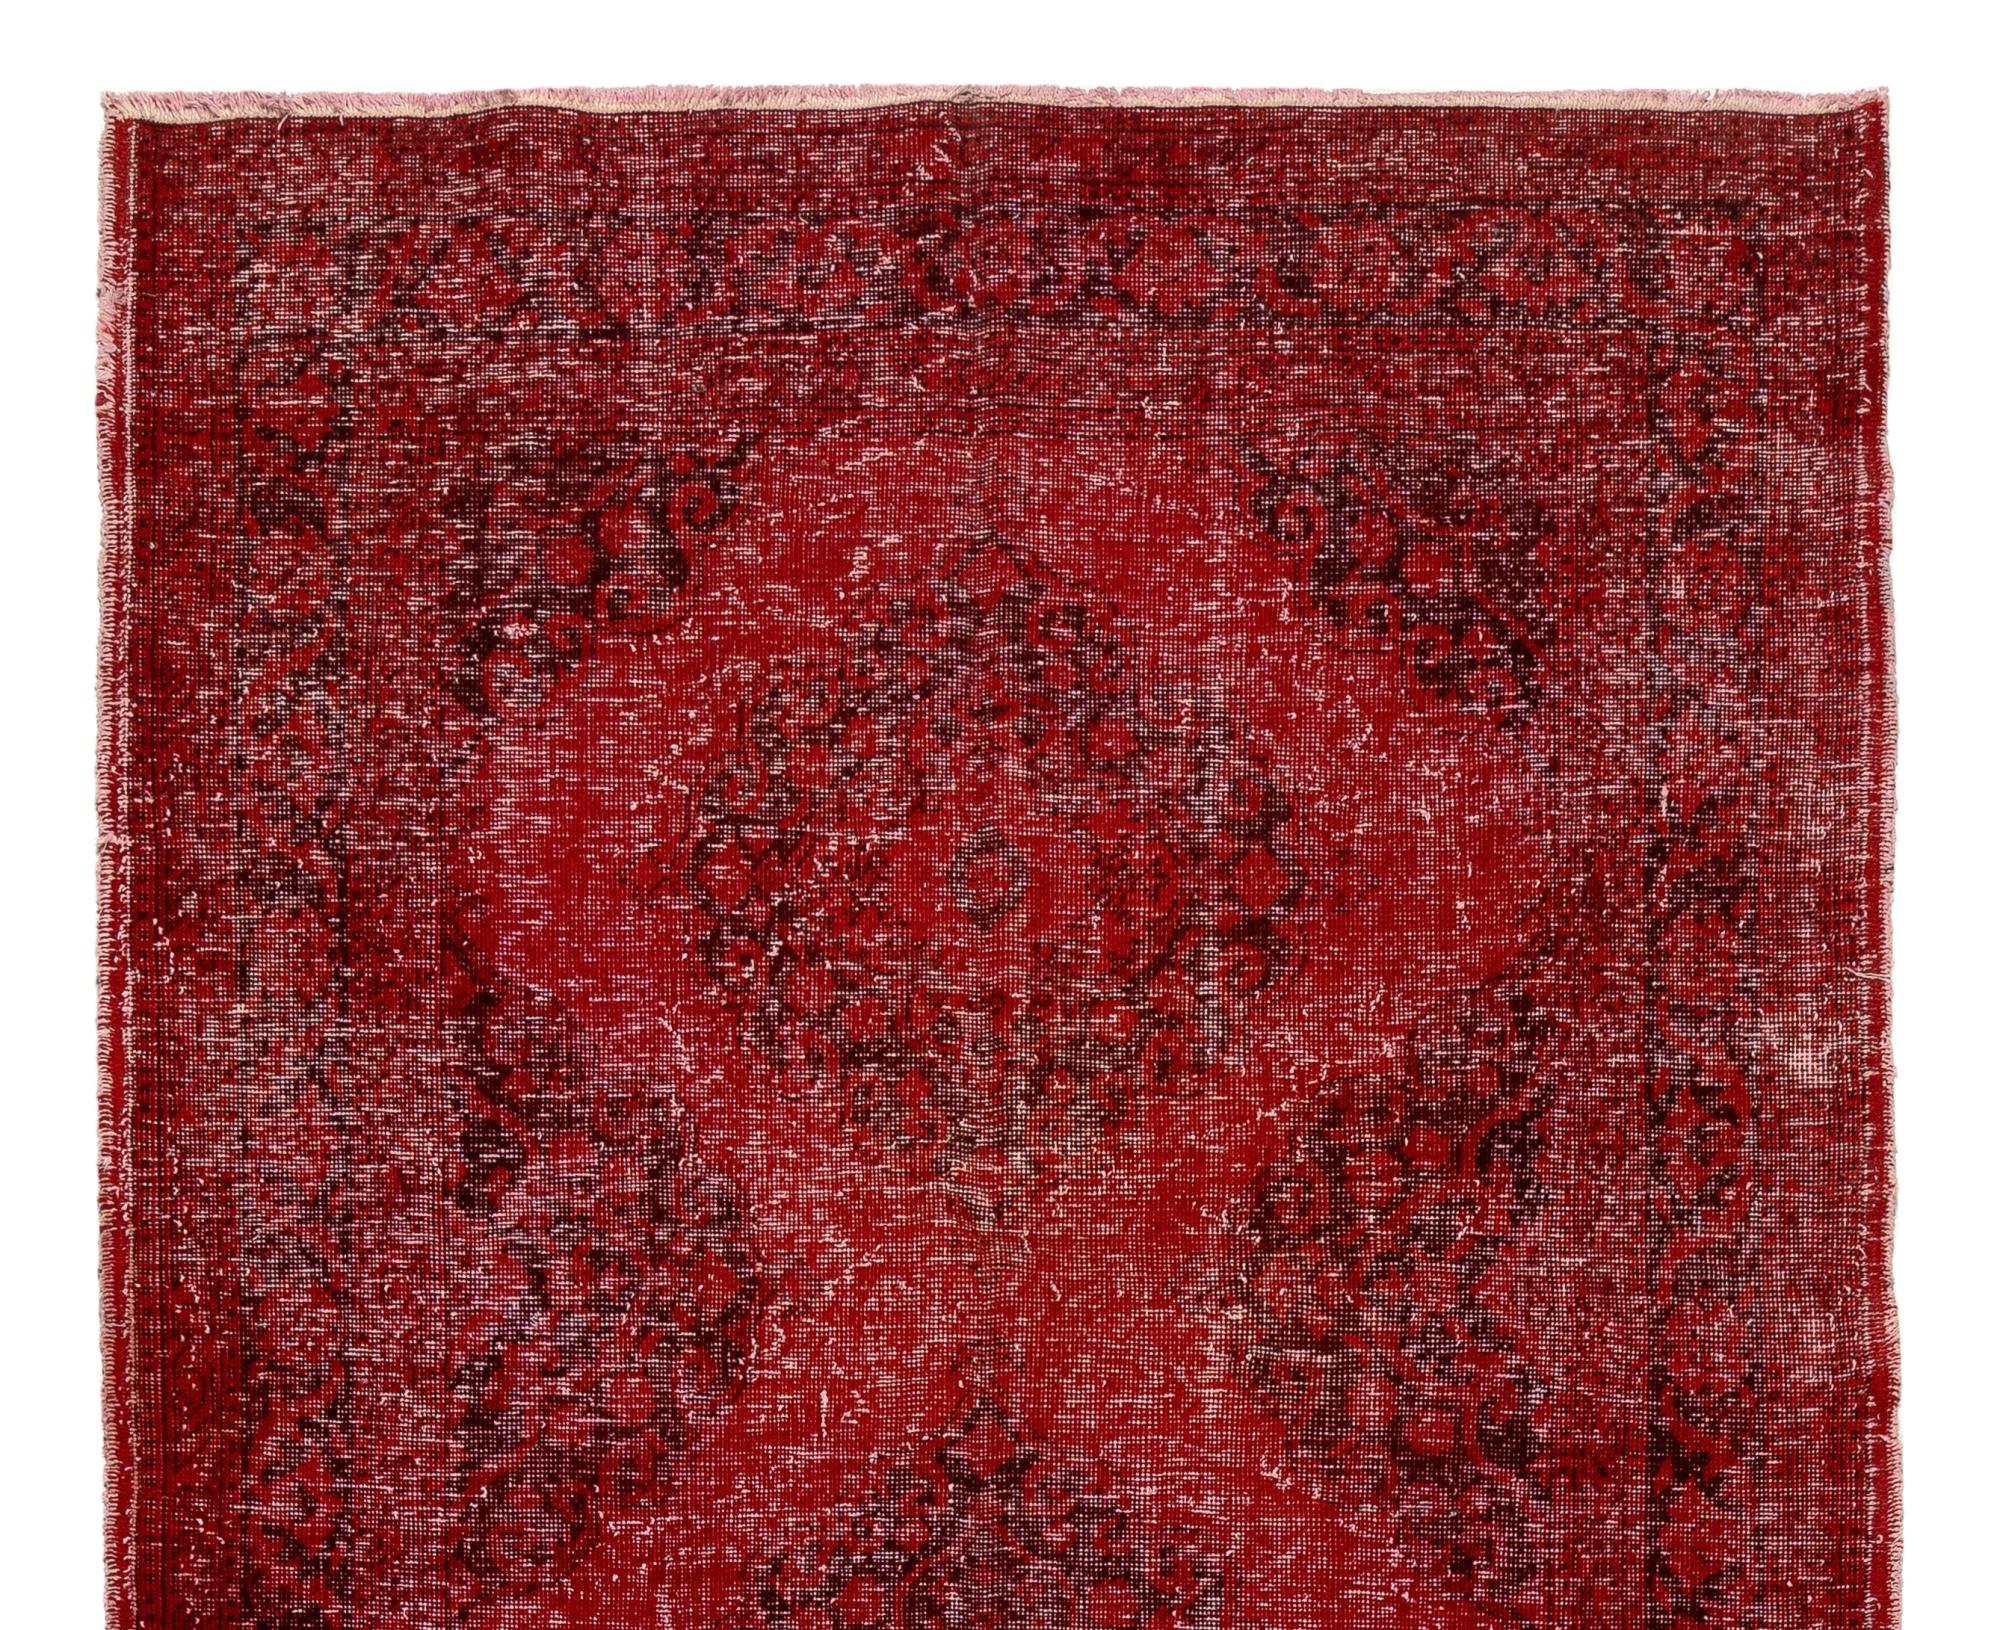 A vintage Turkish runner rug with a linked medallions design over-dyed in a deep, rich red, great for bringing a pop of color and a festive feeling to contemporary interiors.

The rug is finely hand knotted in the 1960s with low wool pile on cotton